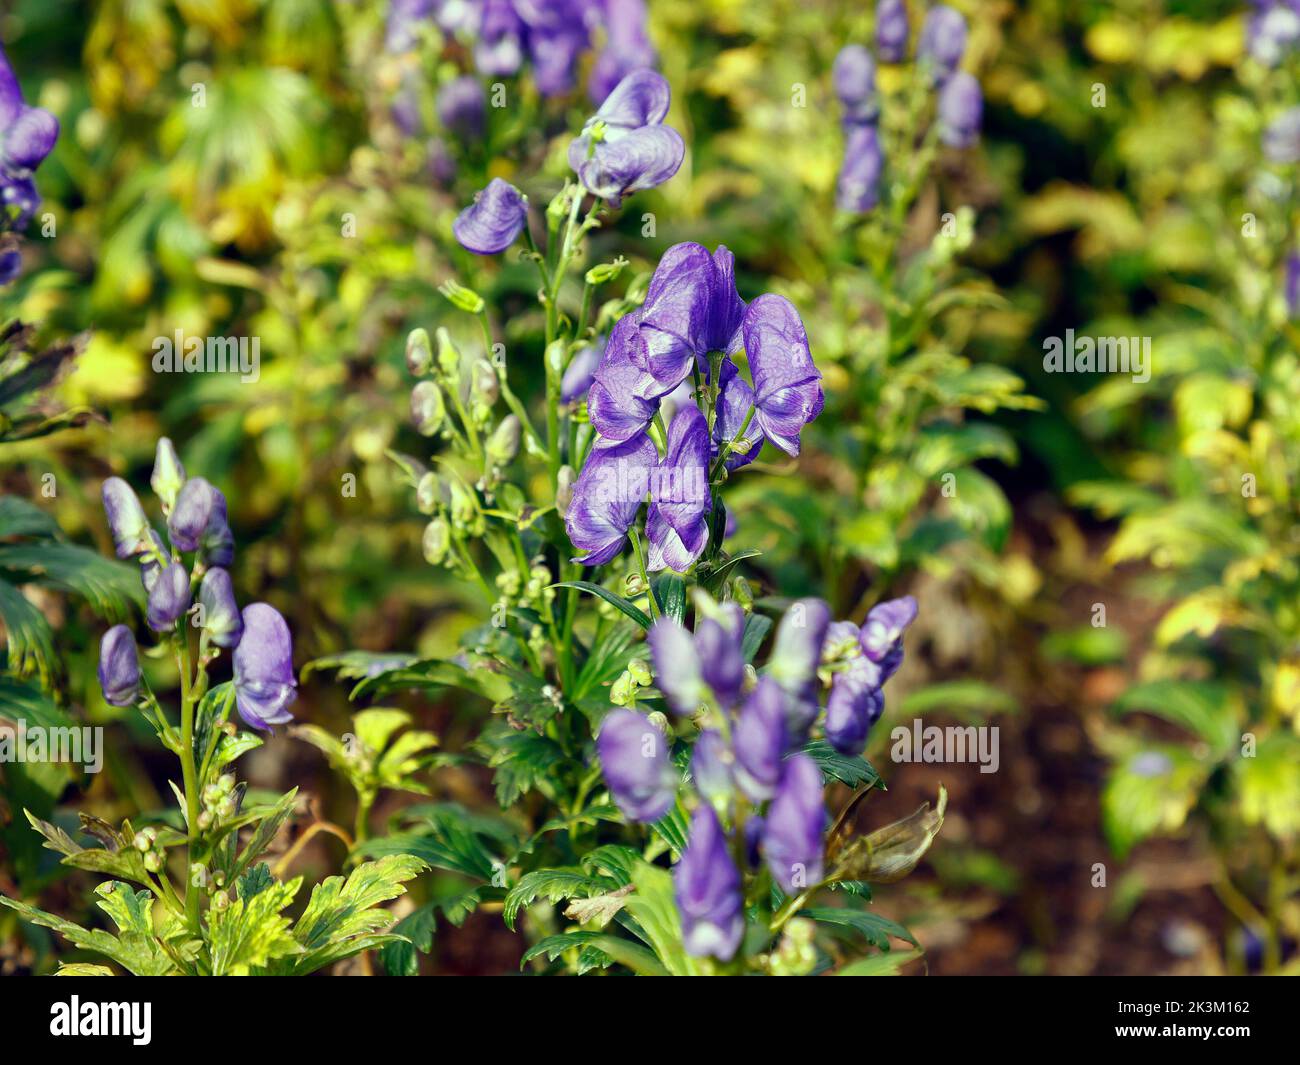 Close up of the deciduous herbaceous perennial garden plant Aconitum x cammarum Bicolor or Monkshood growing upright spikes of blue and white flowers. Stock Photo